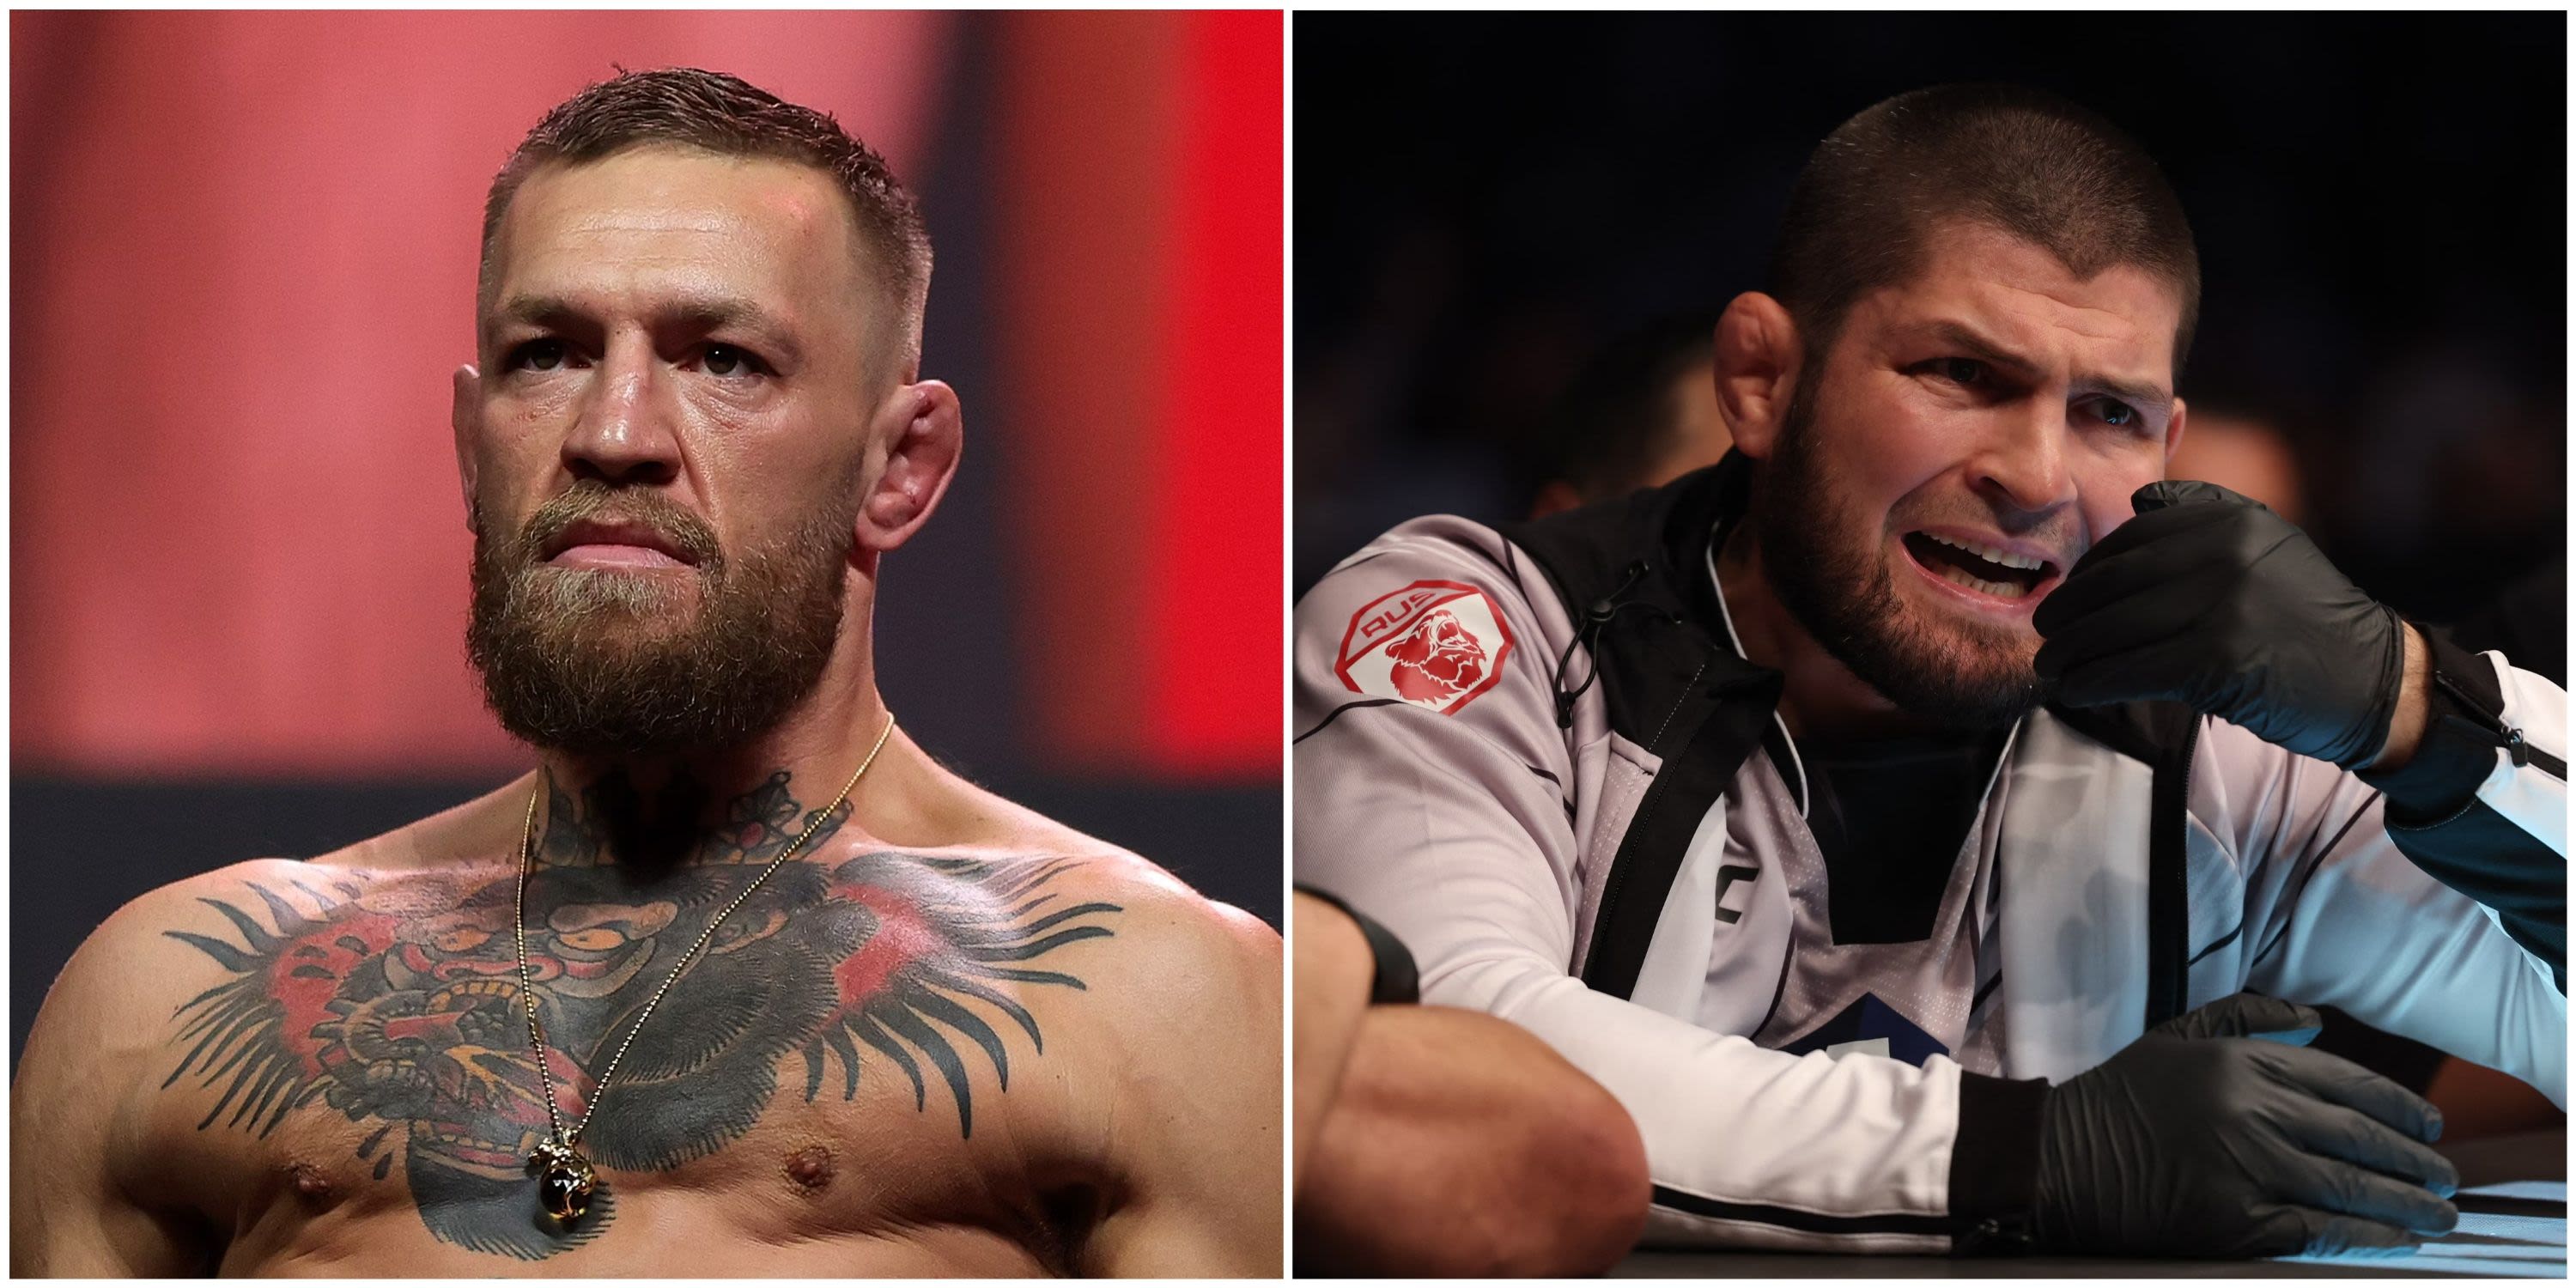 Conor McGregor wants to welcome Khabib Nurmagomedov back to the UFC following his reported tax issues